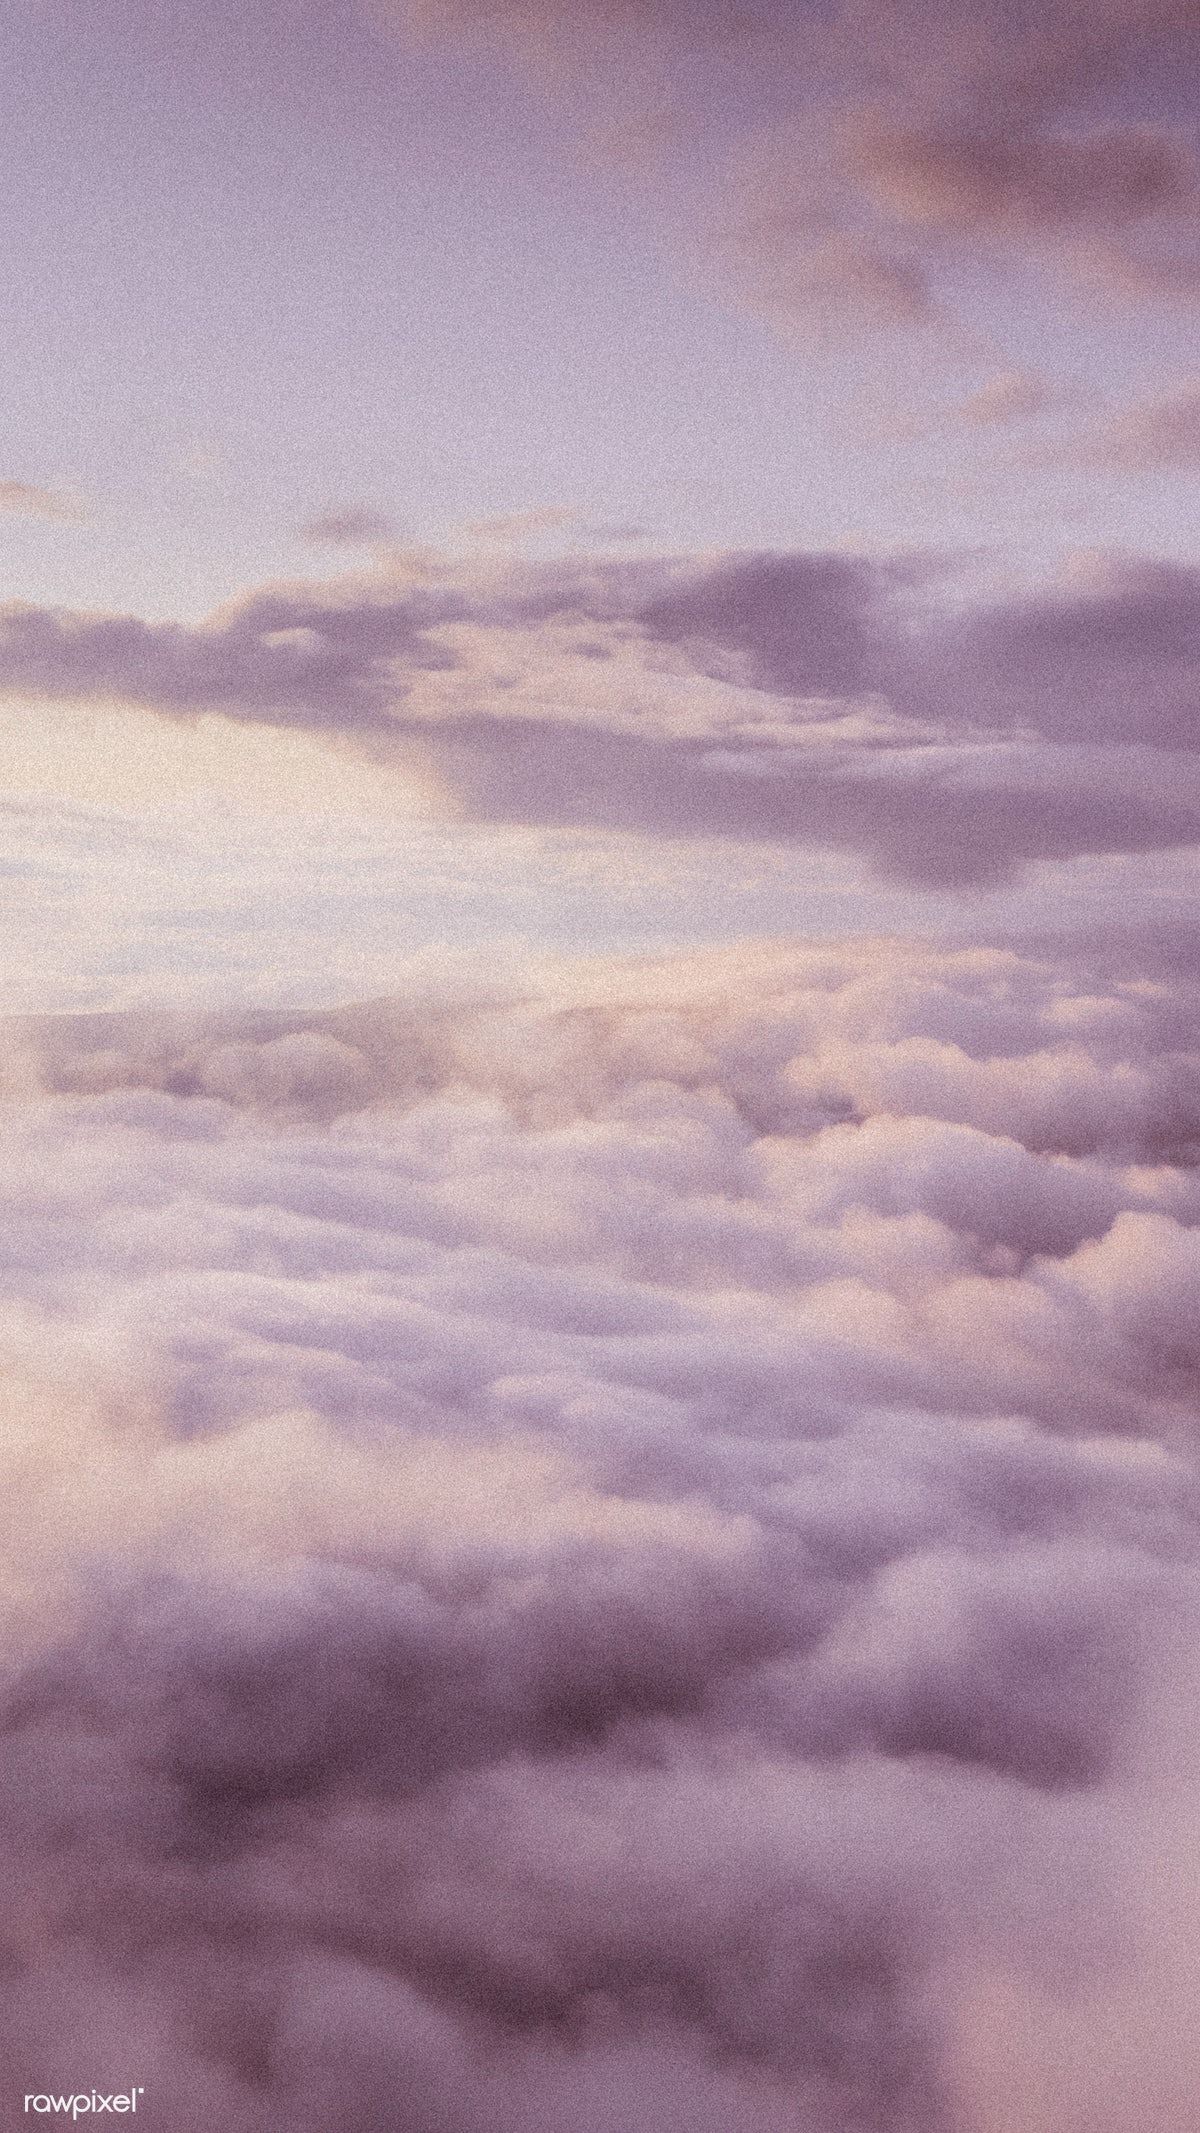 Download free image of Cloudy sky during dusk mobile phone wallpaper by Luke Stackpoole about iphone wallpaper, purple wallpaper iphone wallpaper, phone wallpaper, sky, and pink sky 1227077